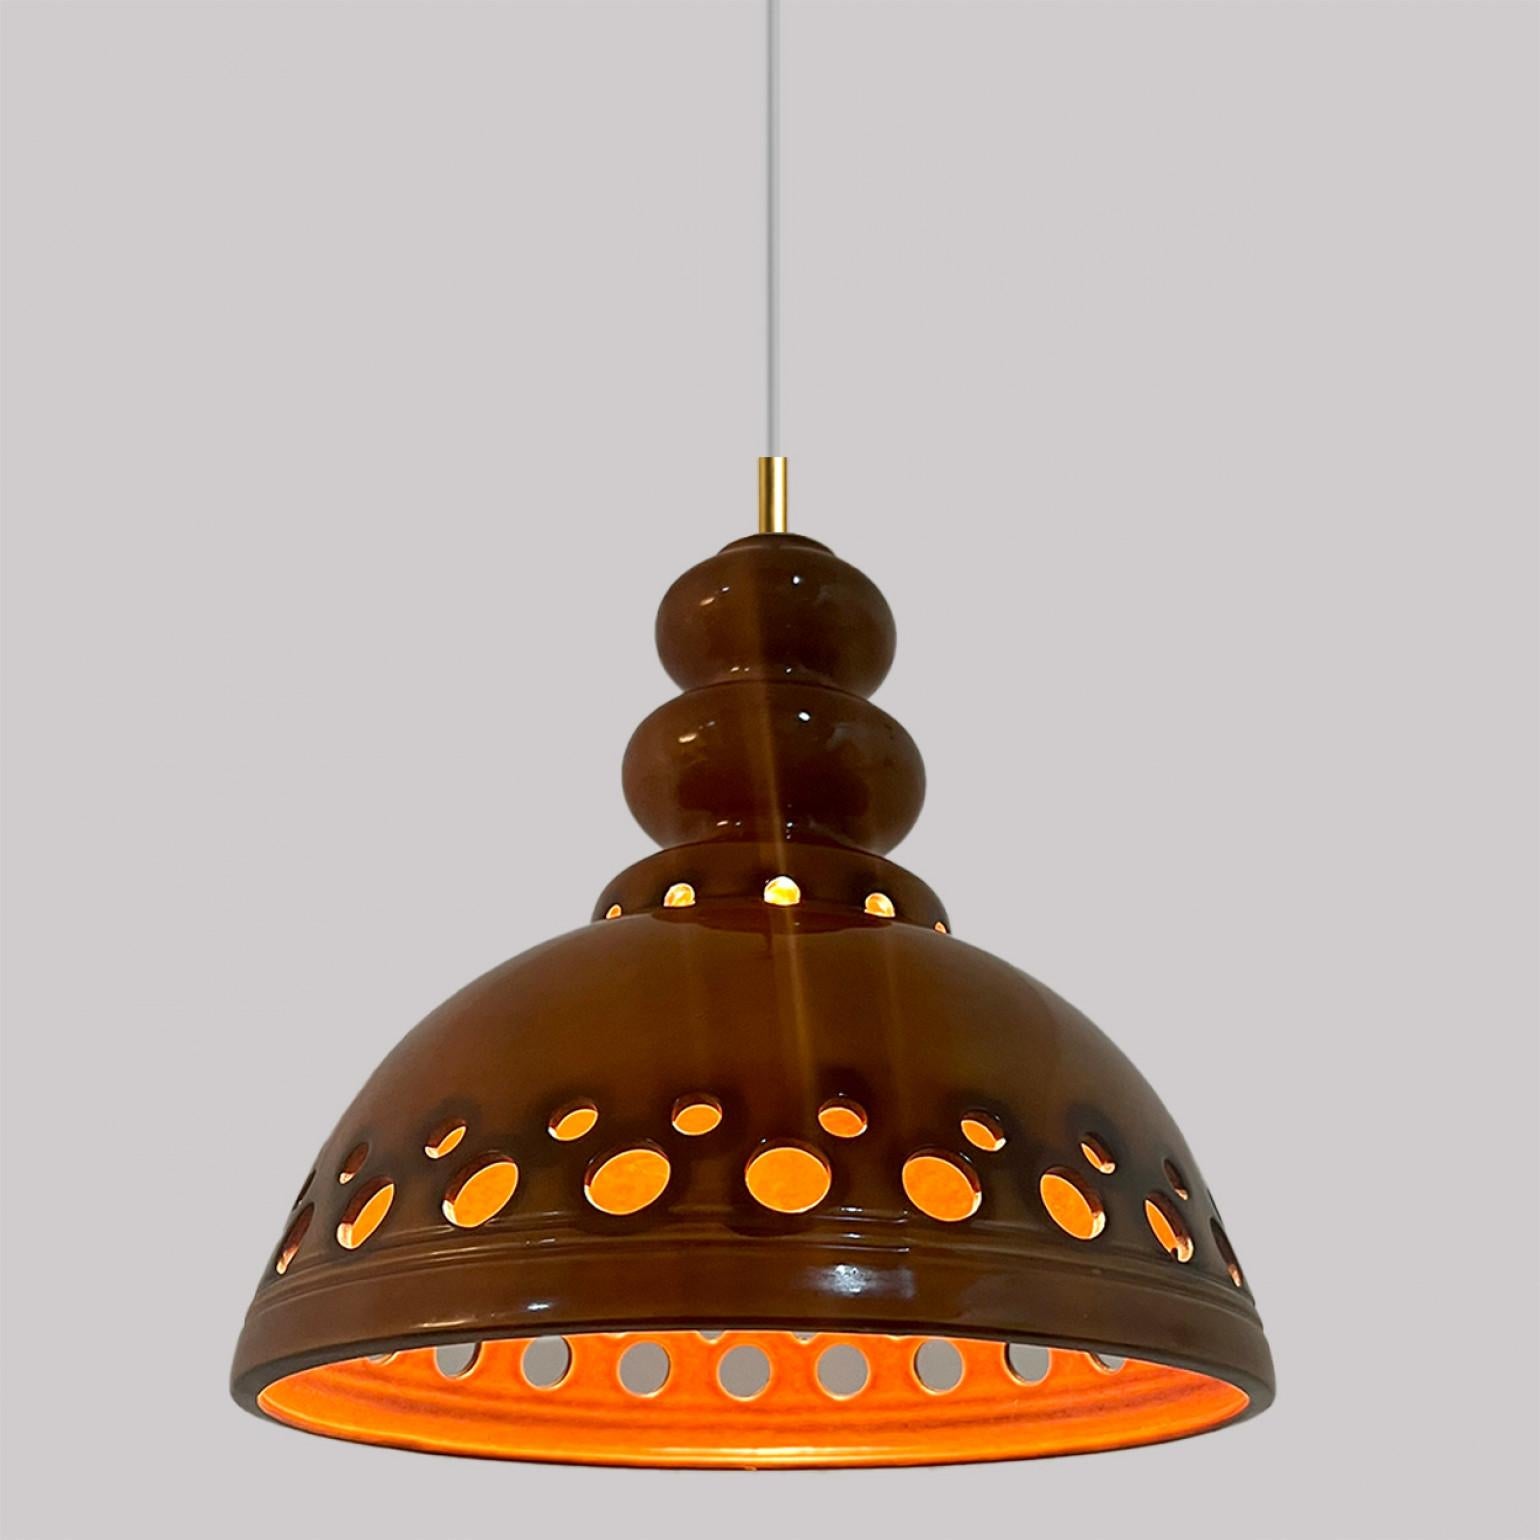 Set of Mixed Brown Glazed Ceramic Pendant Lights, Germany, 1970s For Sale 4